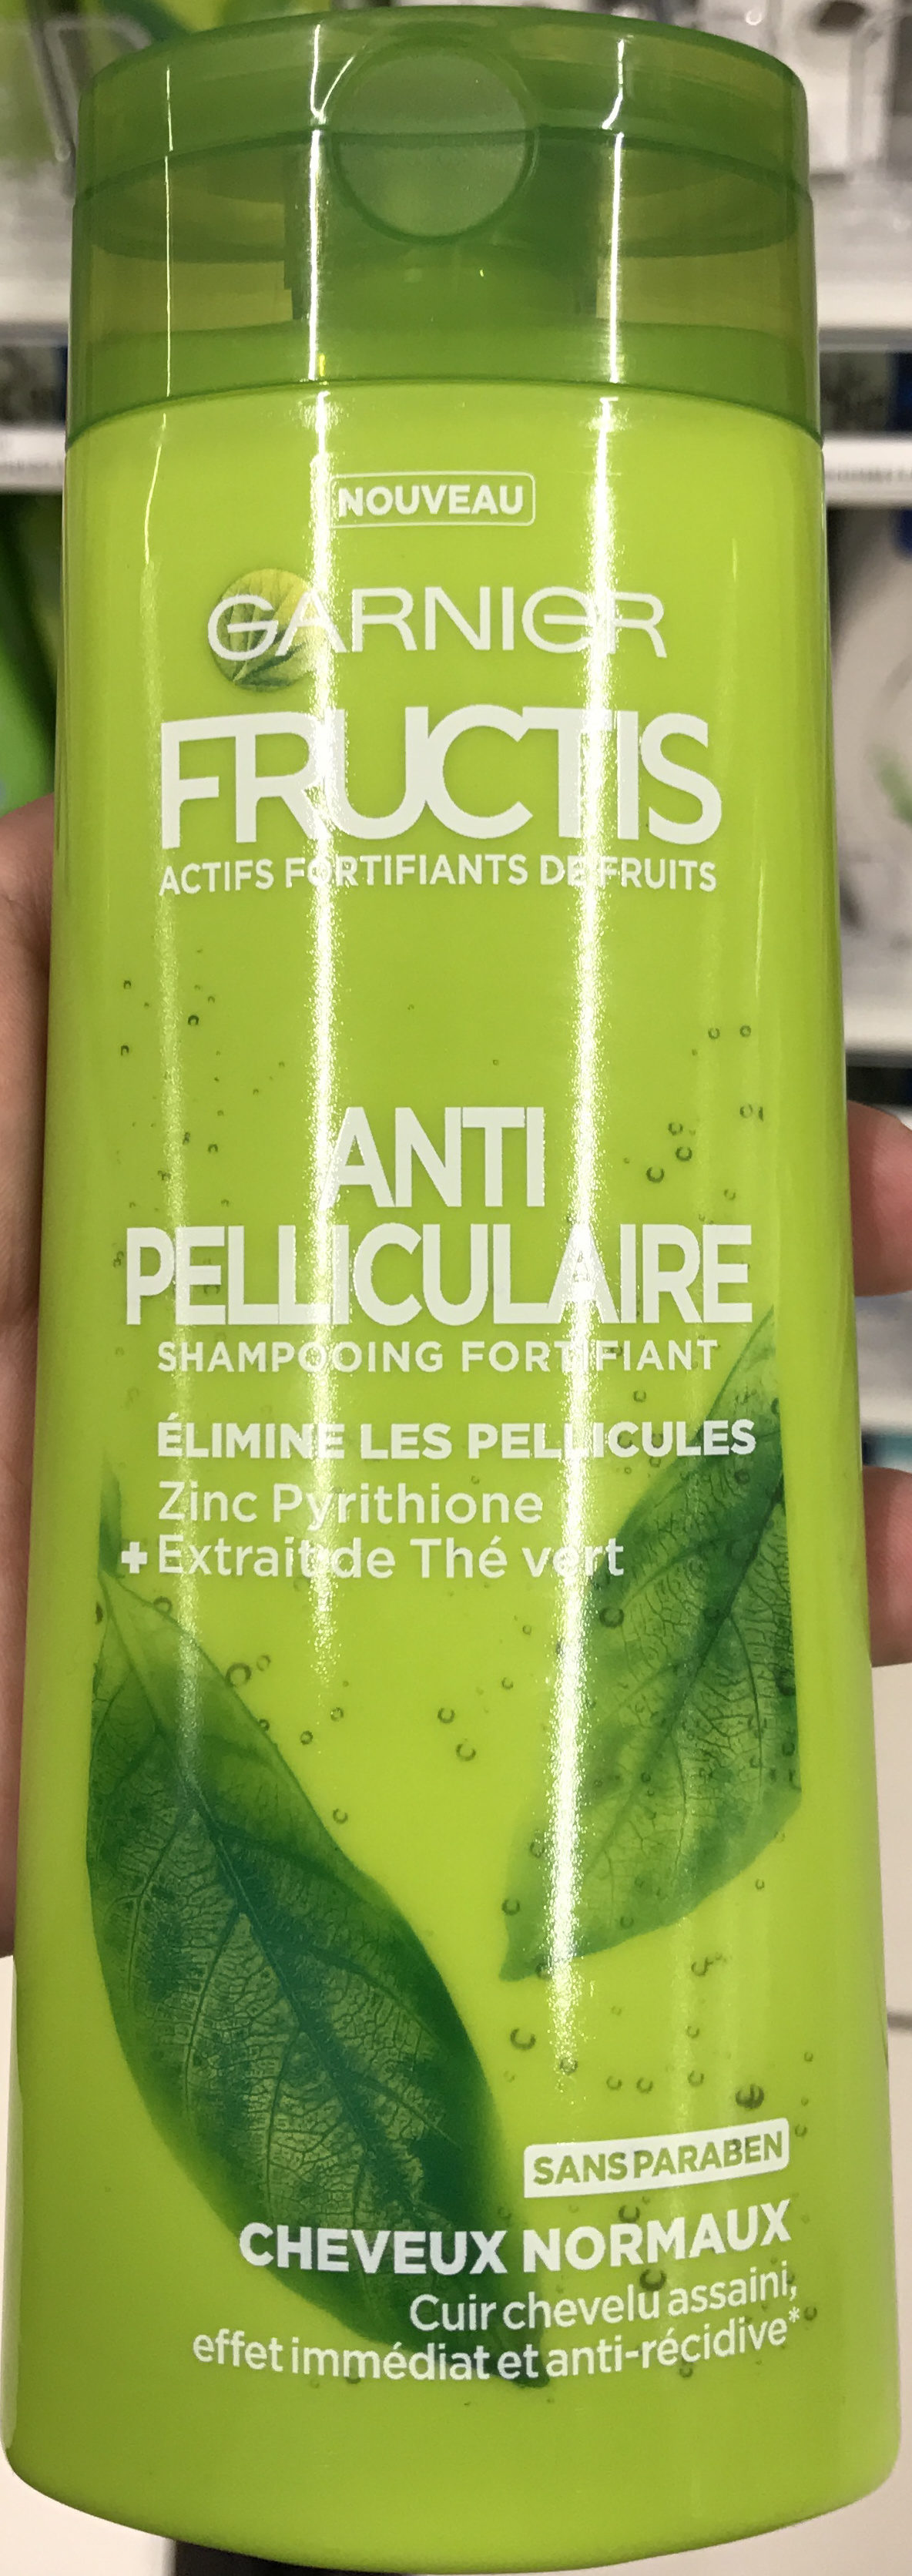 Fructis Anti-Pelliculaire - Product - fr